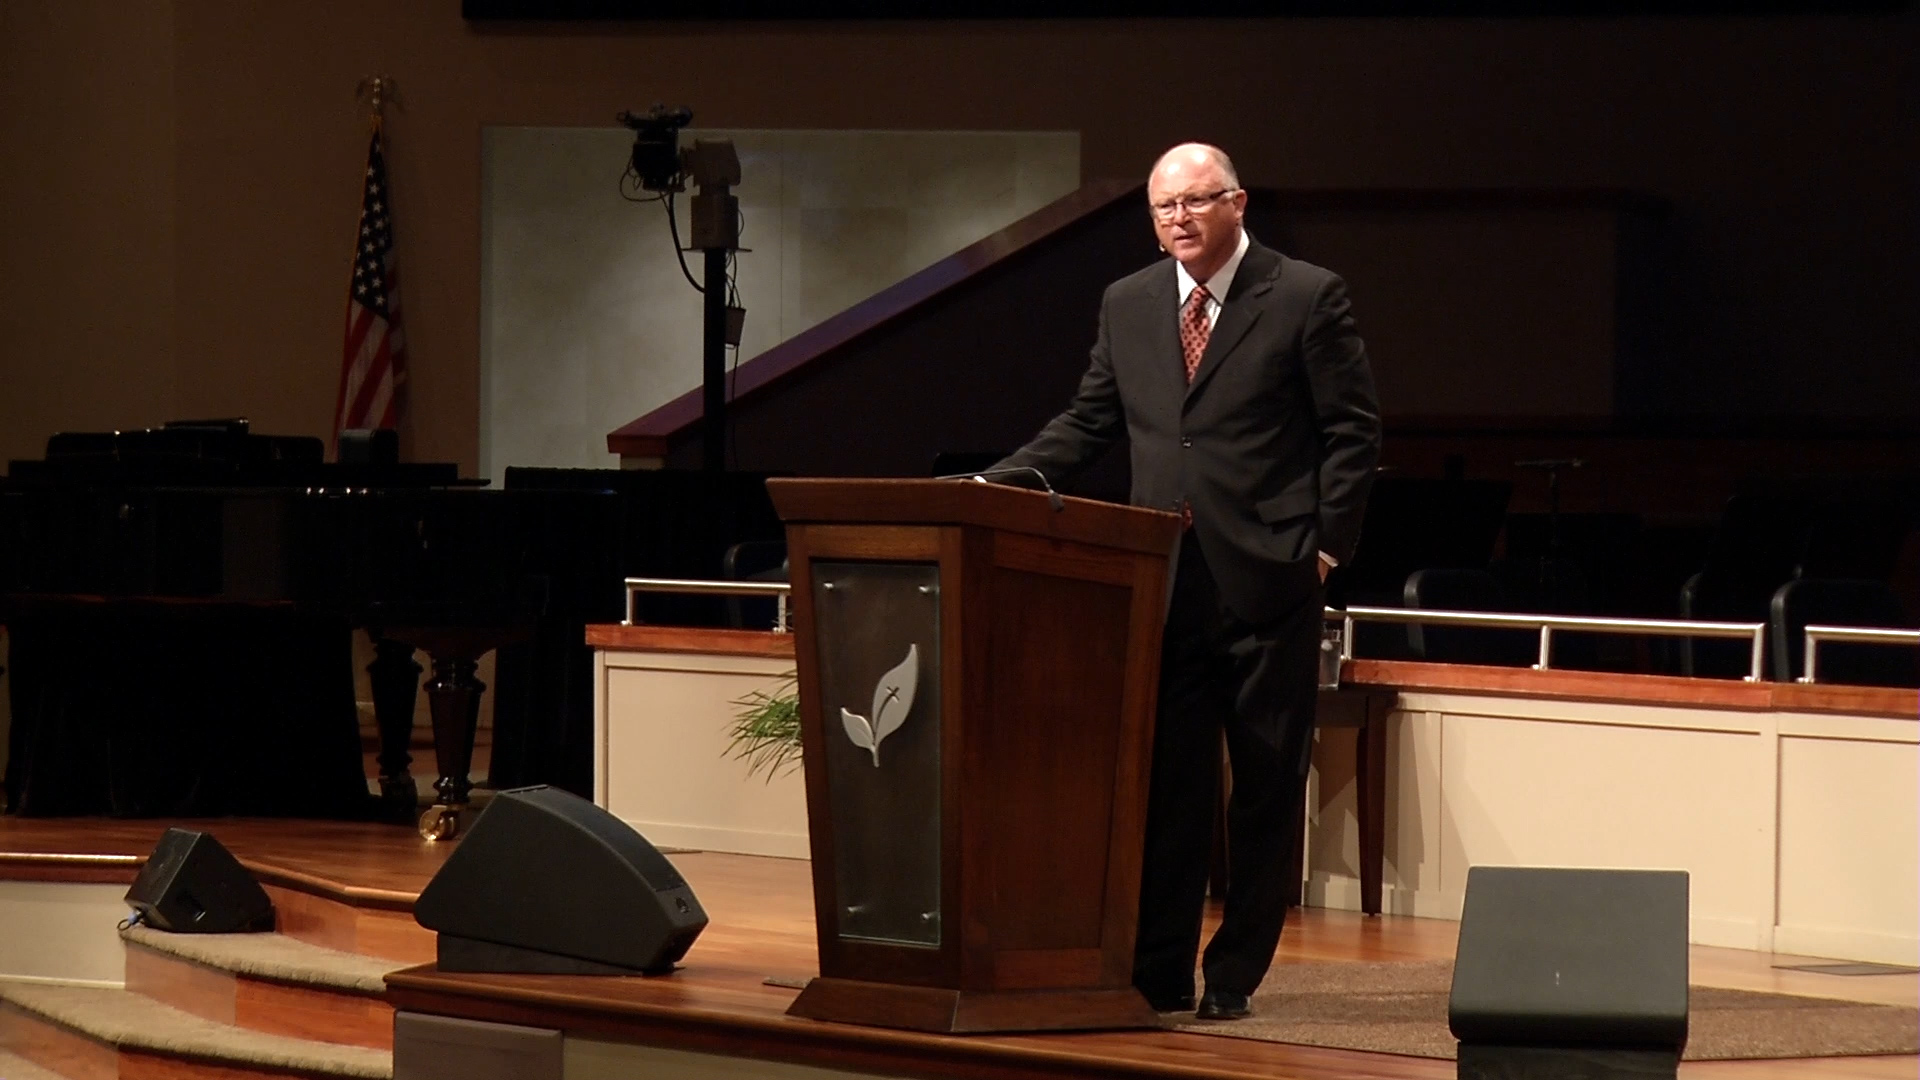 Pastor Paul Chappell: A Calling of Grace